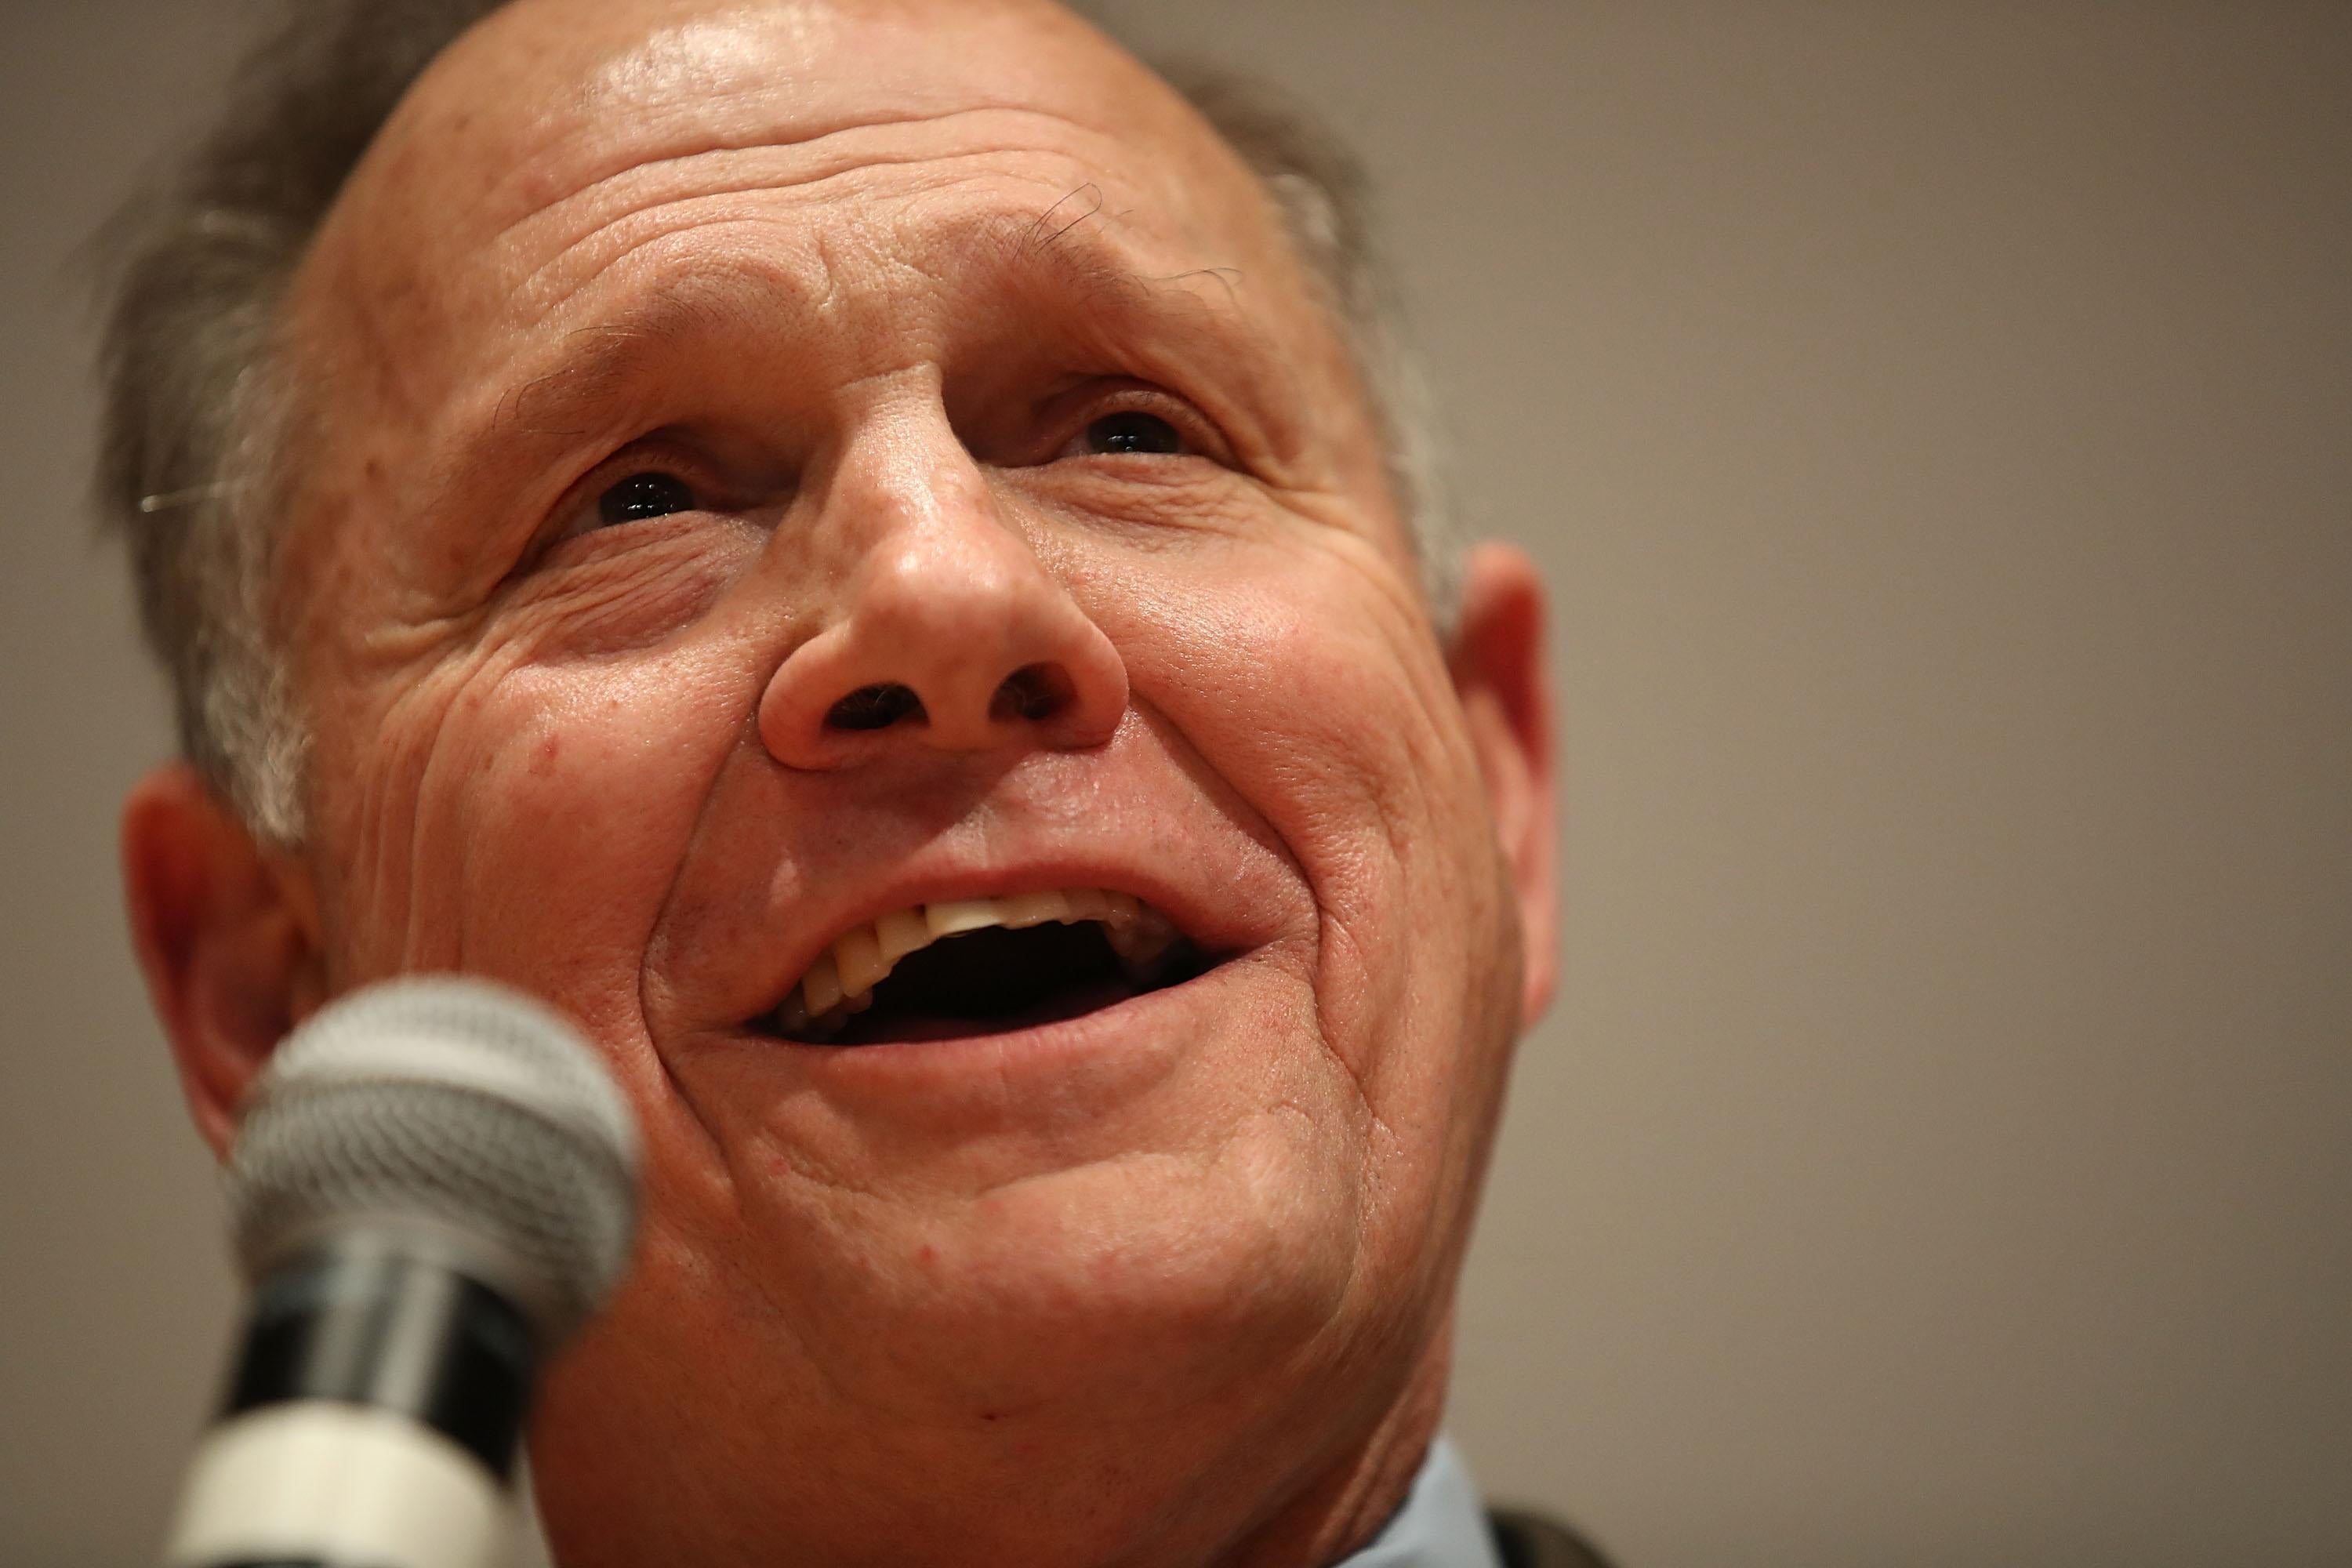 Republican Senatorial candidate Roy Moore speaks about the race against his Democratic opponent Doug Jones is too close and there will be a recount during his election night party in the RSA Activity Center on December 12, 2017 in Montgomery, Alabama. The candidates are running in a special election to replace Attorney General Jeff Sessions in the U.S. Senate.  (Photo by Joe Raedle/Getty Images)